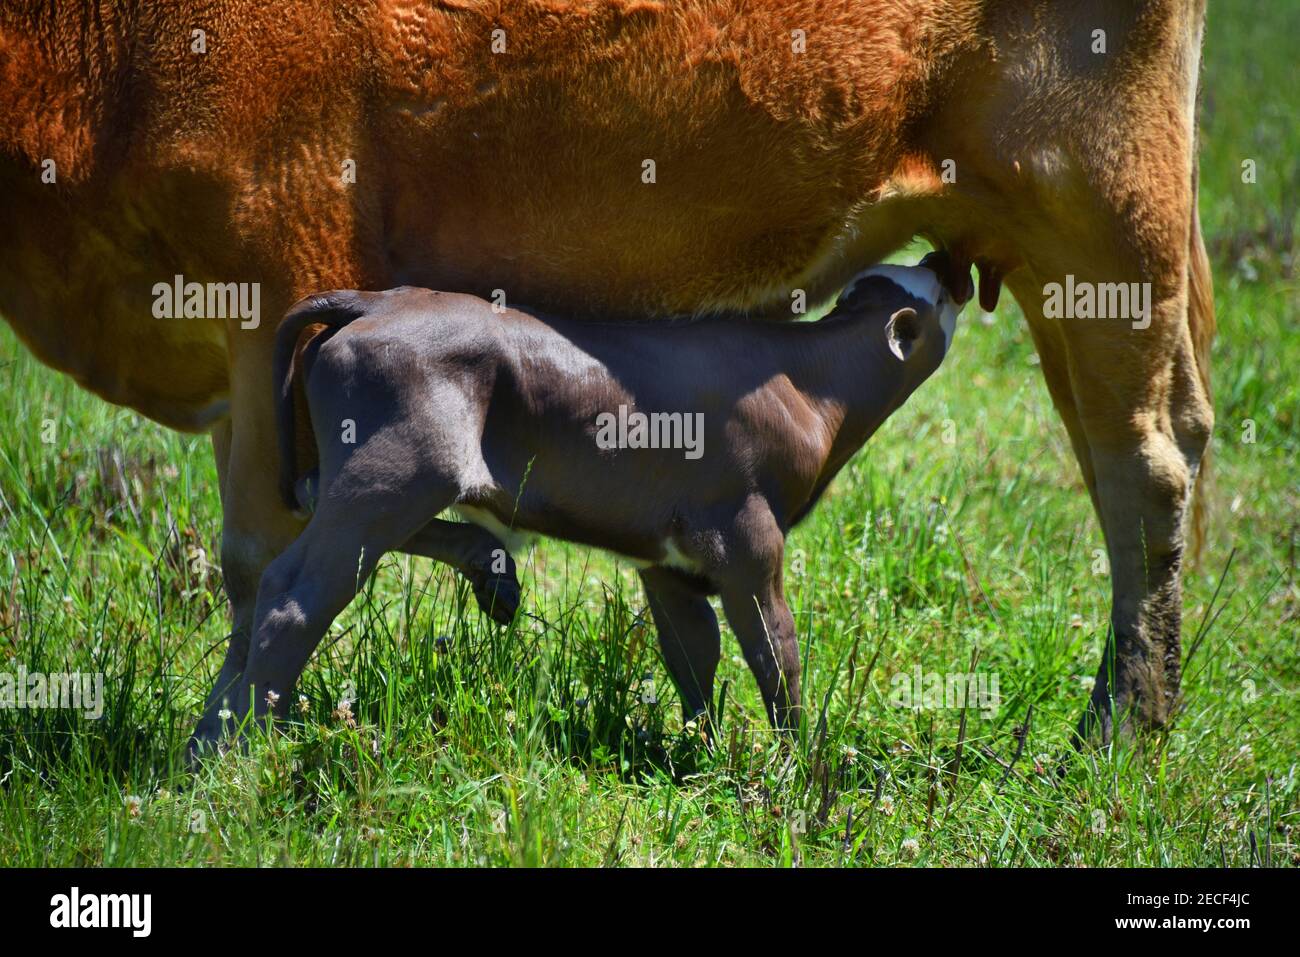 Young calf suckles its mother.  Calf is brown with a white face.  One leg fights for balance. Stock Photo